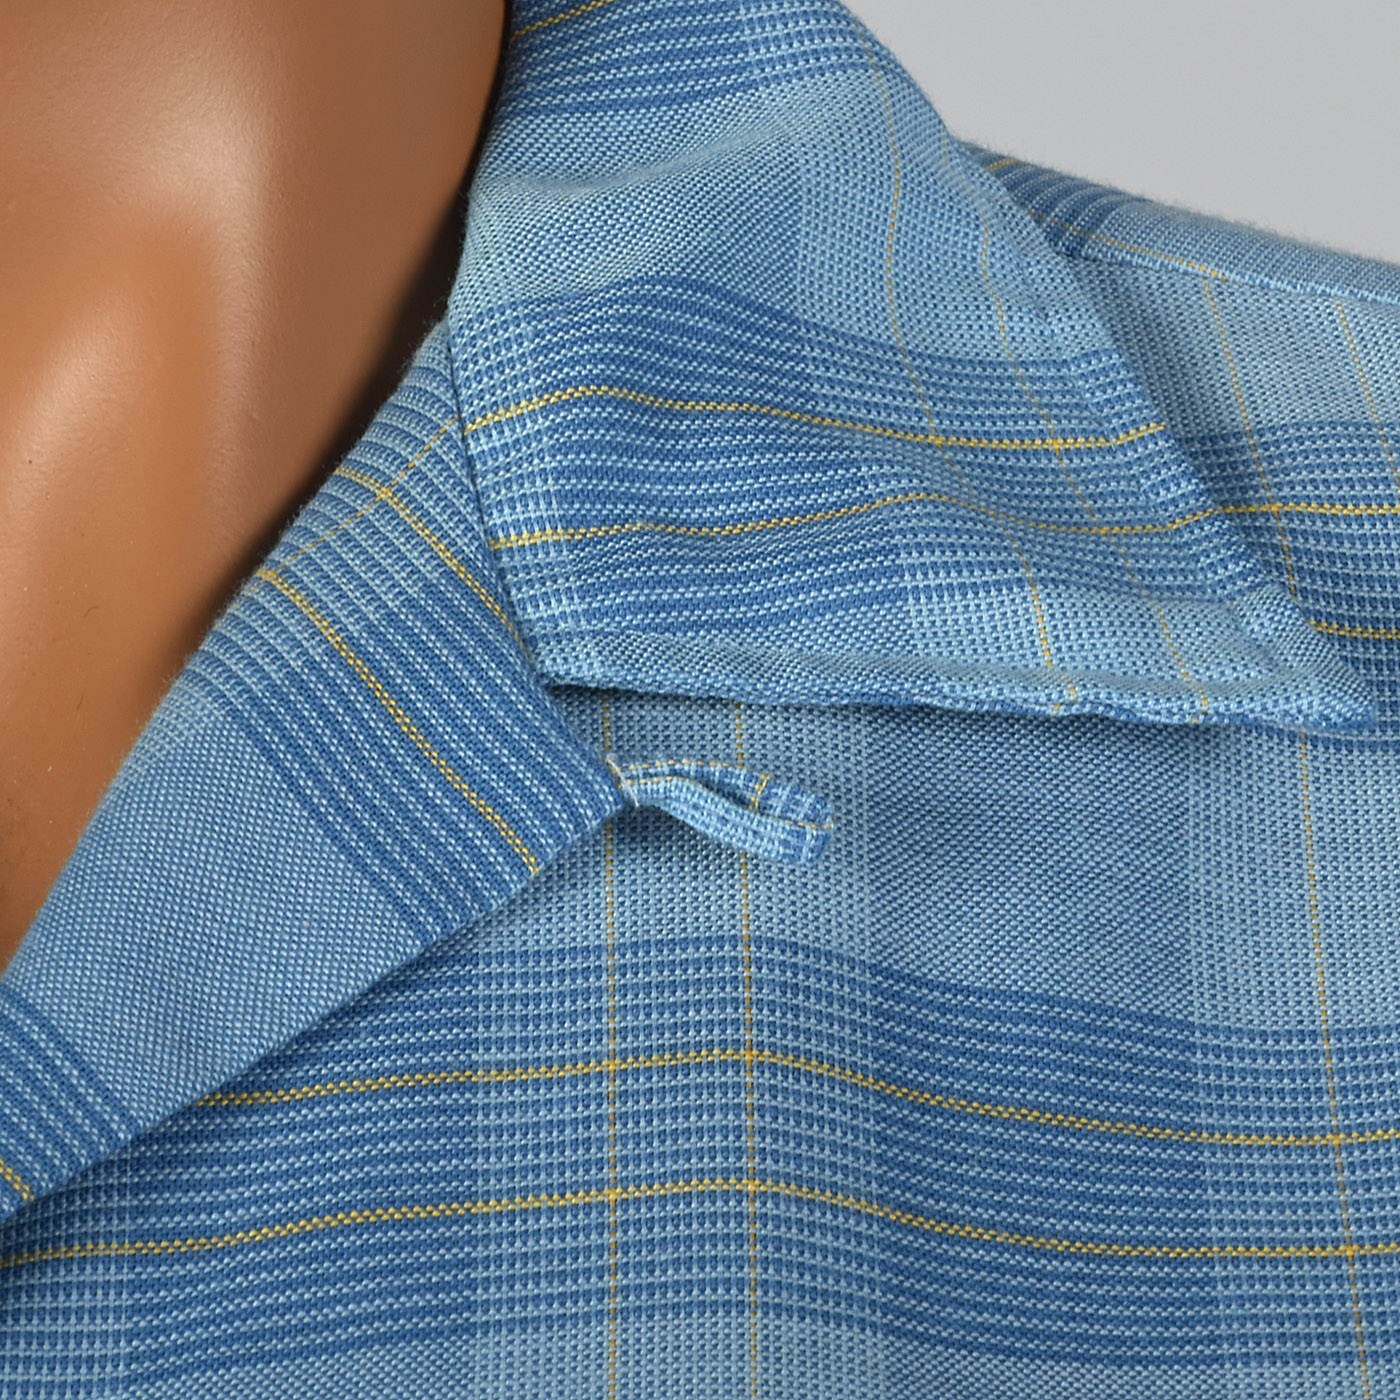 1960s Mens Blue Plaid Shirt with Loop Collar